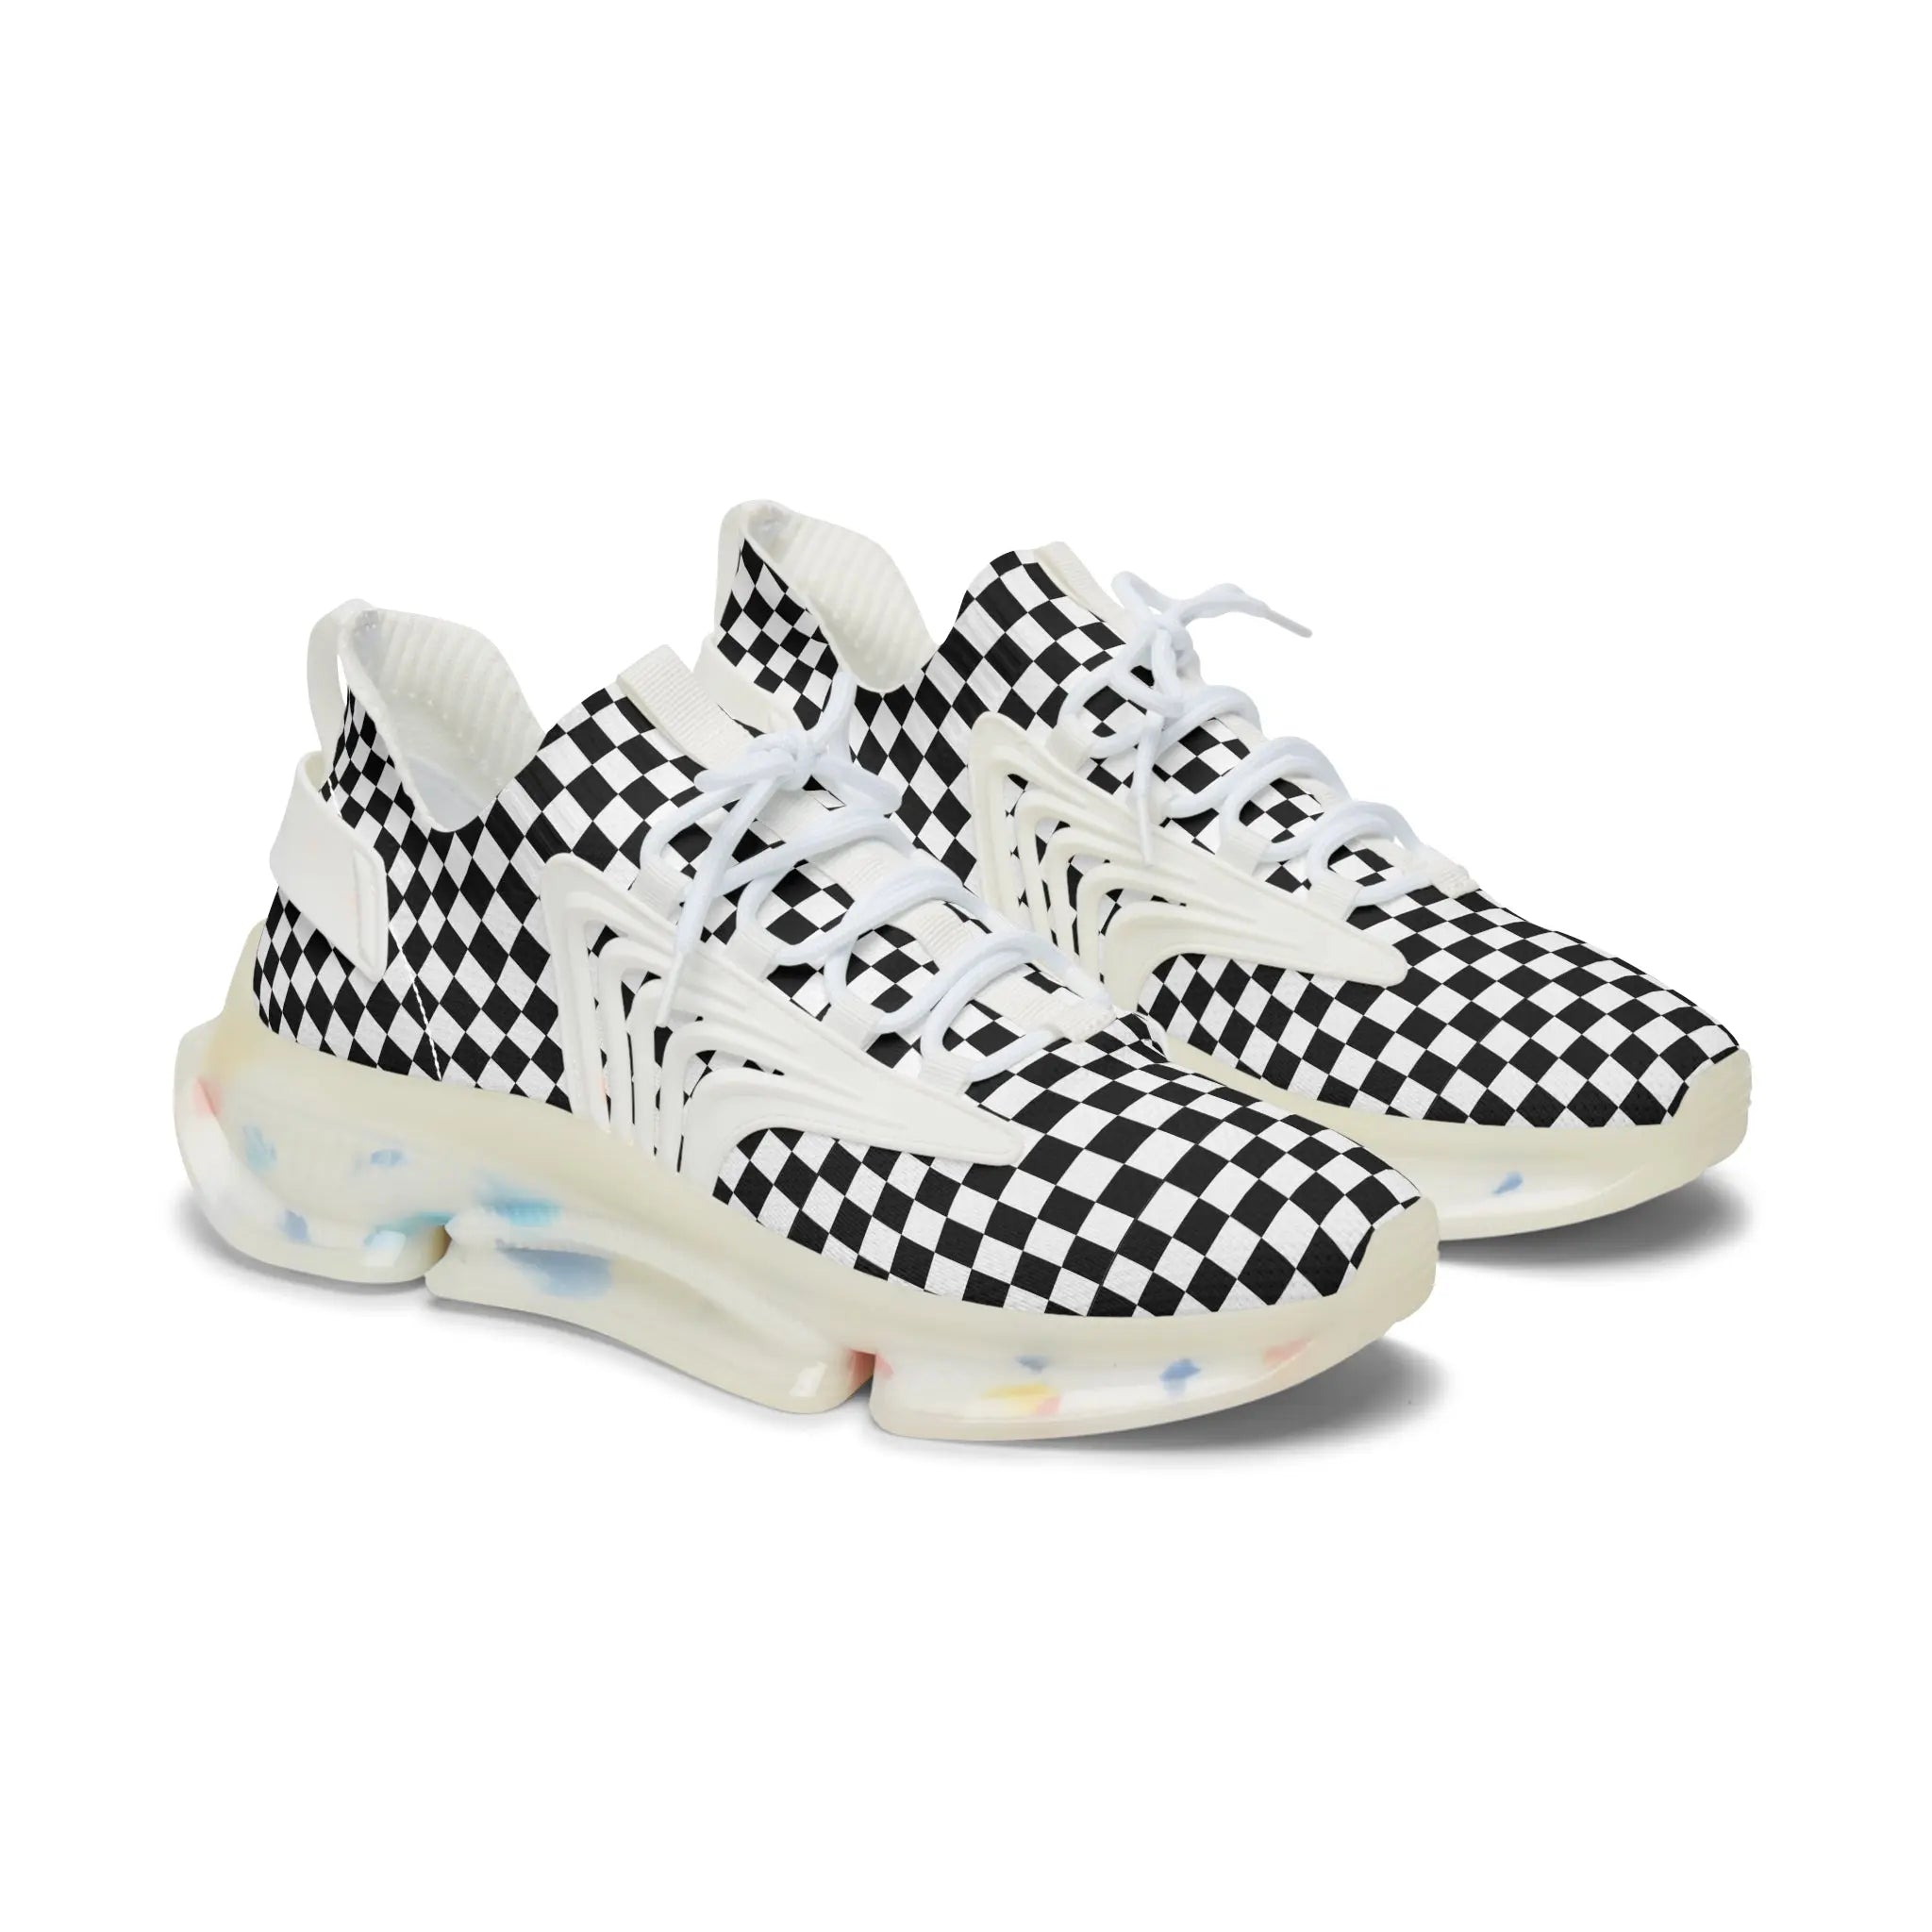 Women's Black and White Check Mate Mesh Sneakers, Women's Athletic Shoes, Casual Sneakers Shoes White-sole-US-12 The Middle Aged Groove